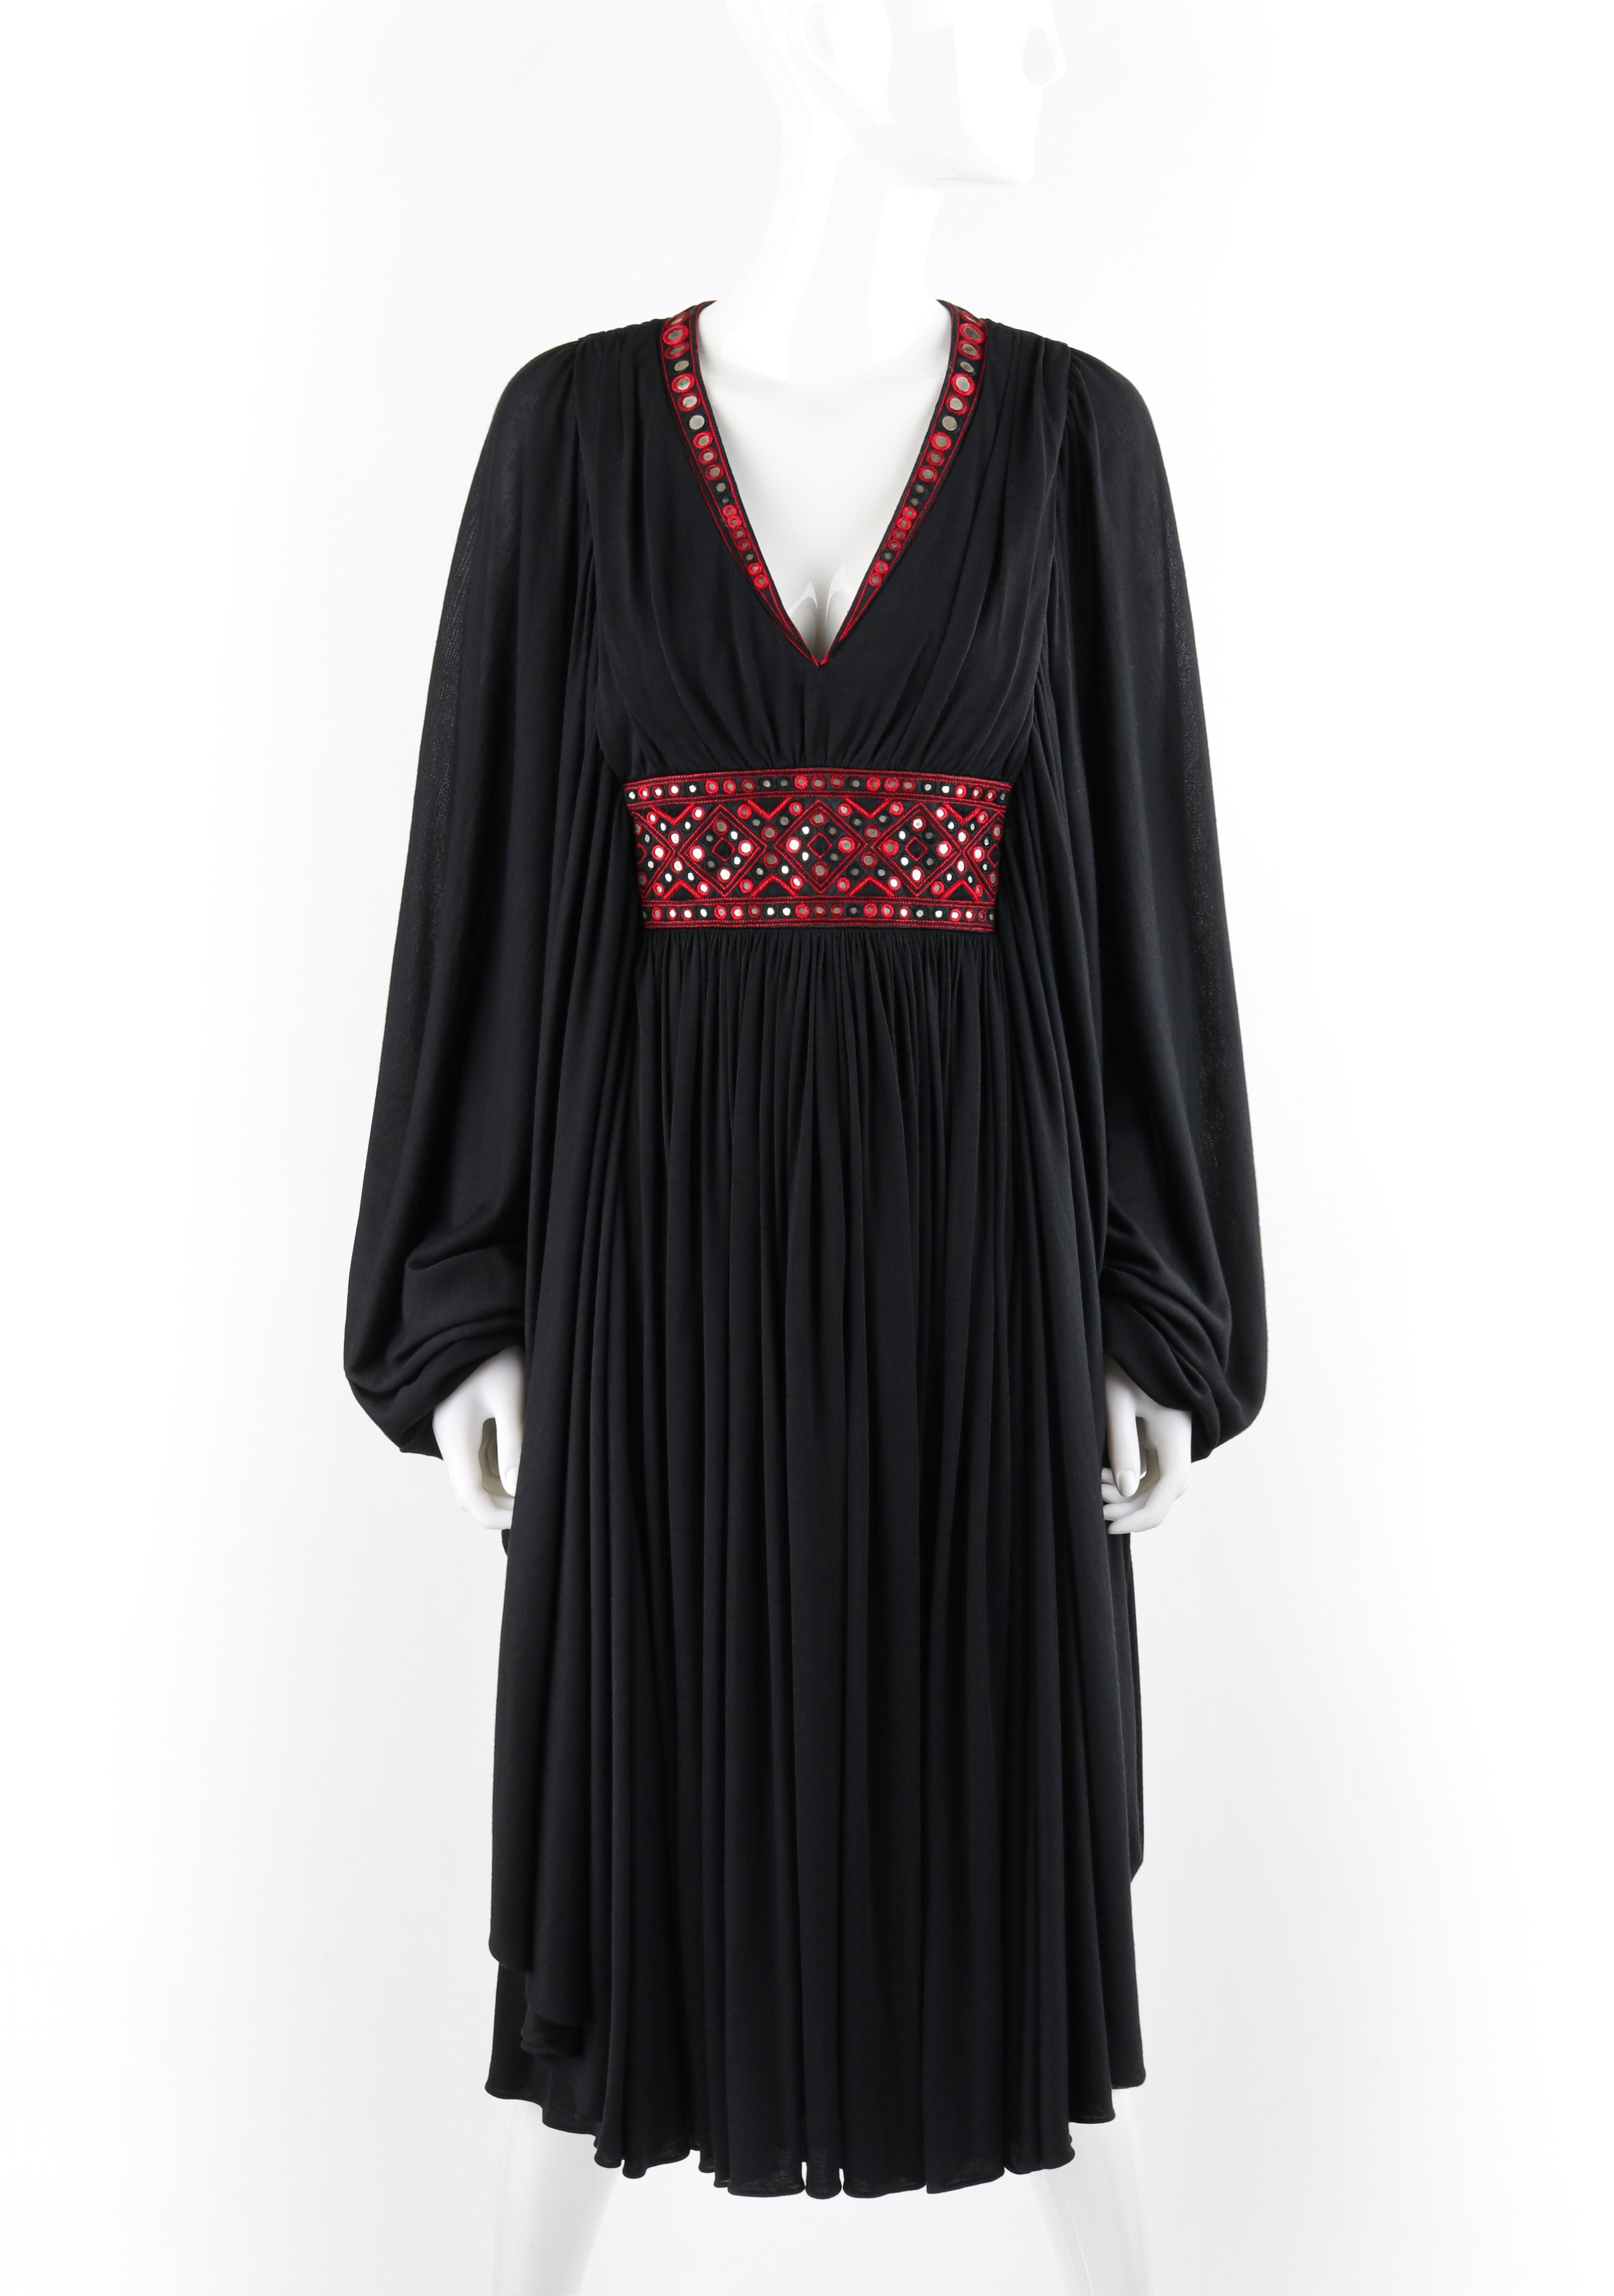 ALEXANDER McQUEEN c.2009 Bohemian Caftan Midi Batwing Sleeve Dress 

Brand / Manufacturer: Alexander McQueen
Collection: c.2009
Designer: Alexander McQueen
Style: Batwing sleeve dress
Color(s): Black, shades of red and gray
Lined: No
Marked Fabric